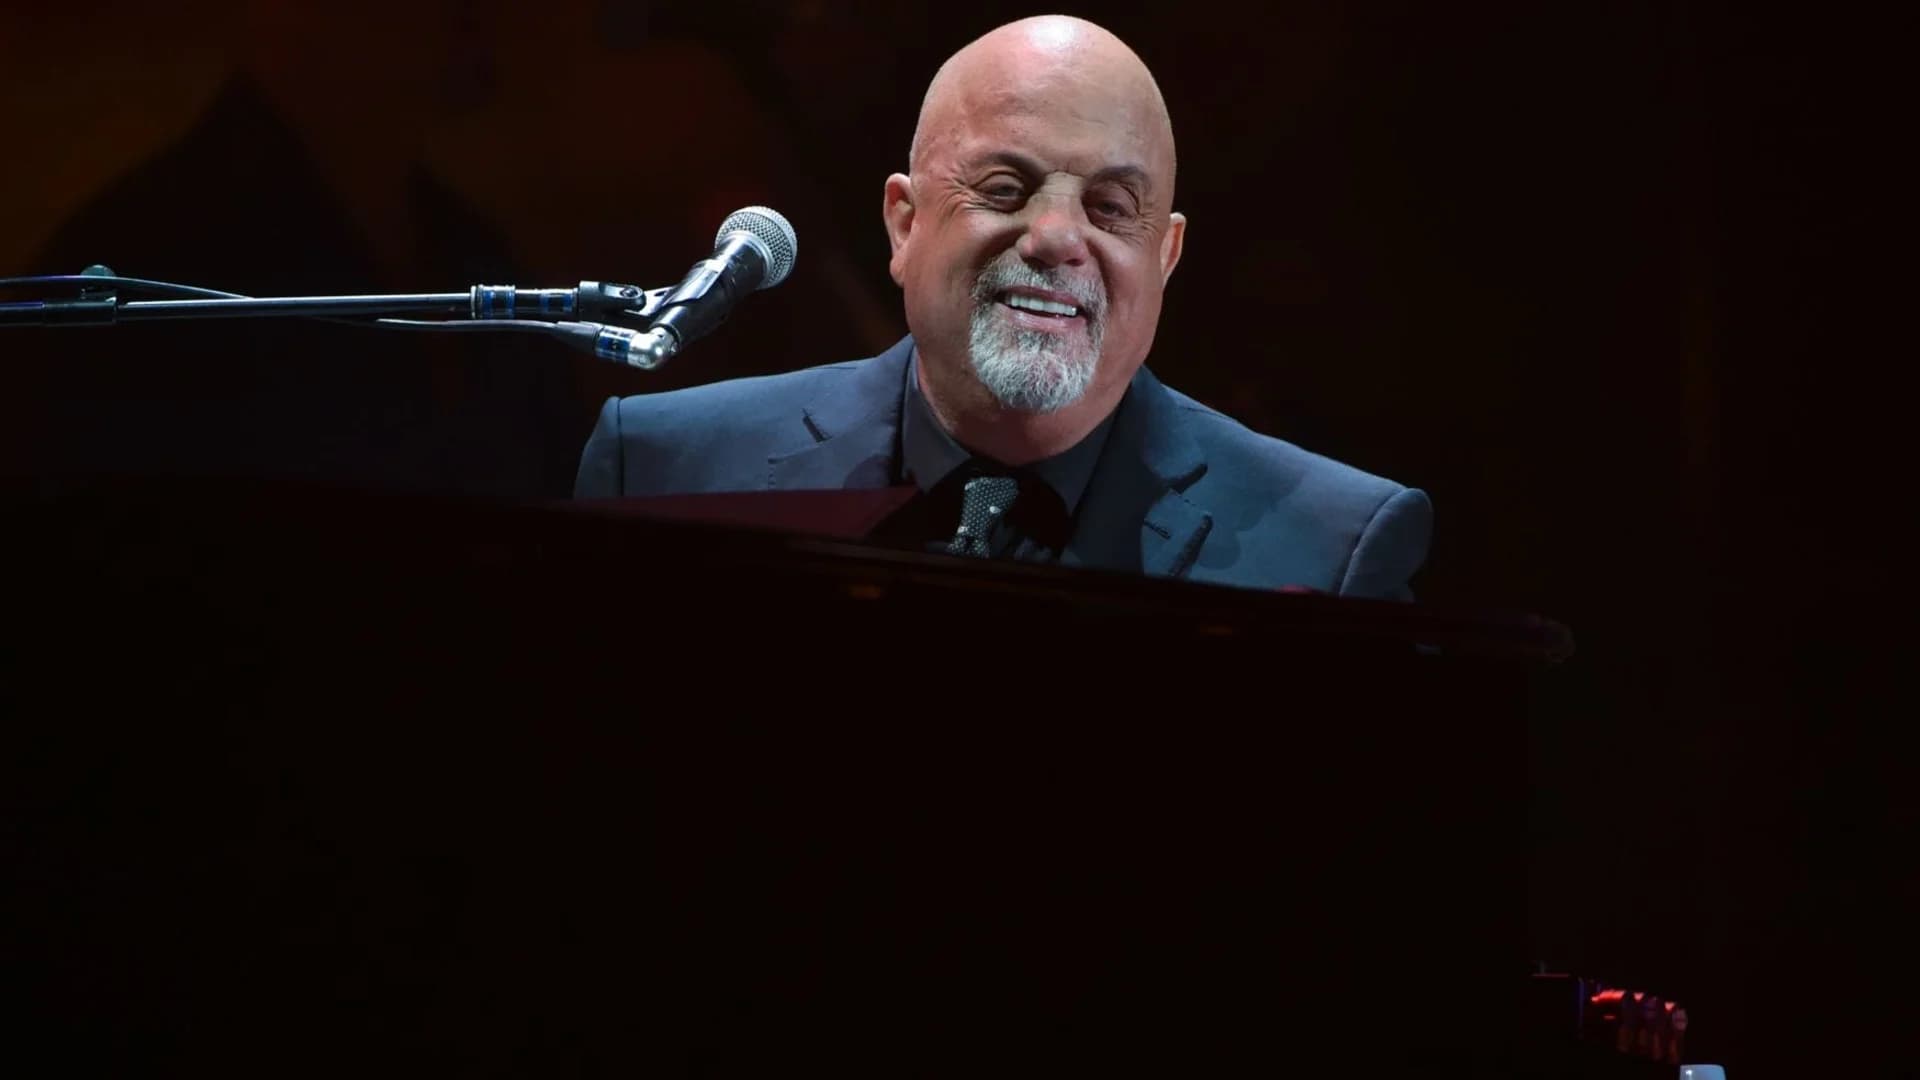 Summer Billy Joel concerts at MSG postponed due to COVID-19 concerns